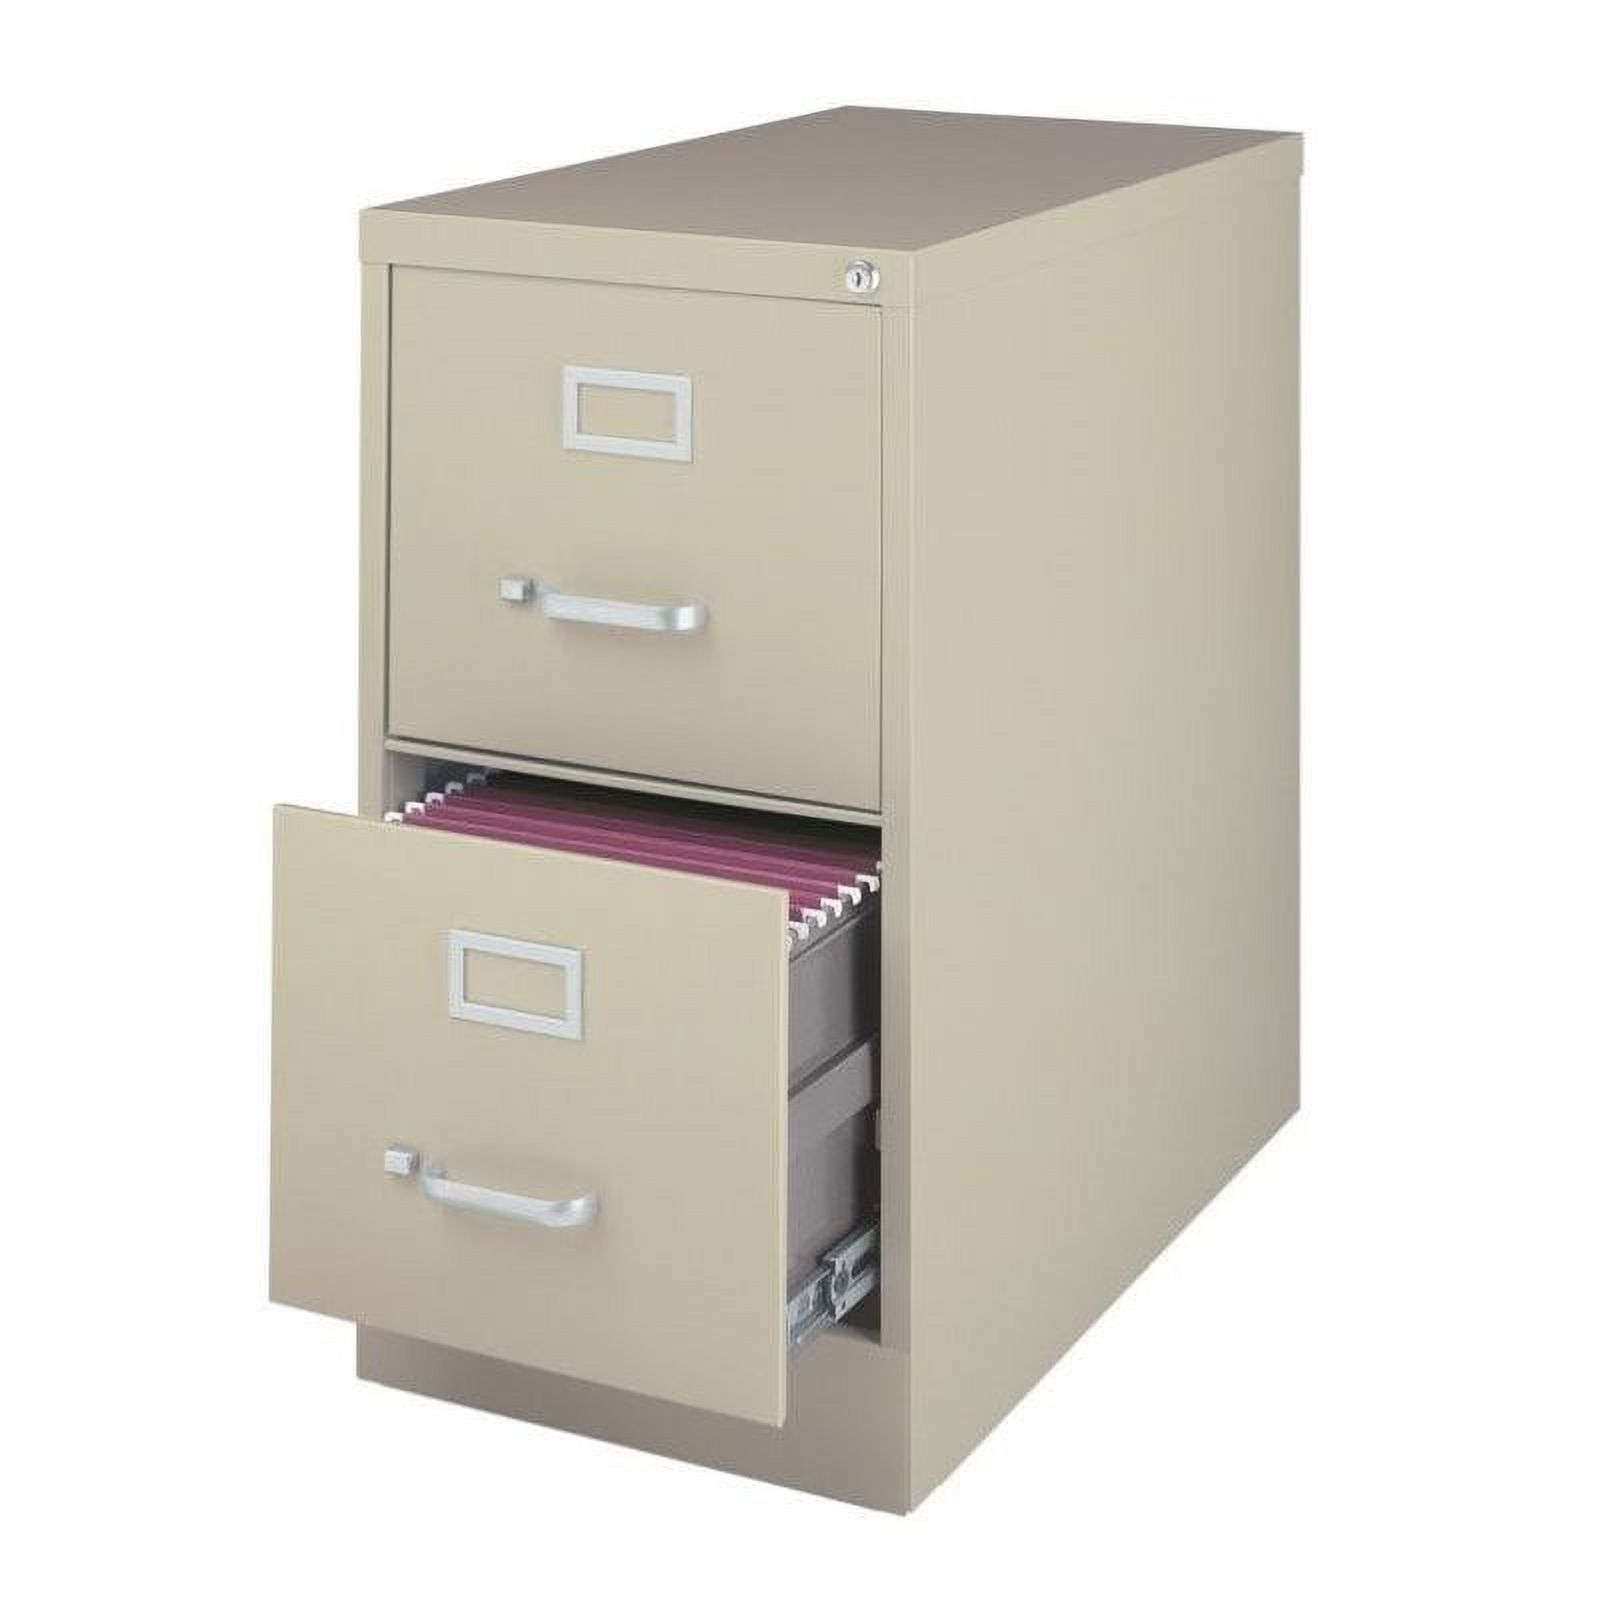 Value Pack (Set of 2) 2 Drawer Vertical Letter File Cabinet in Putty - image 2 of 3